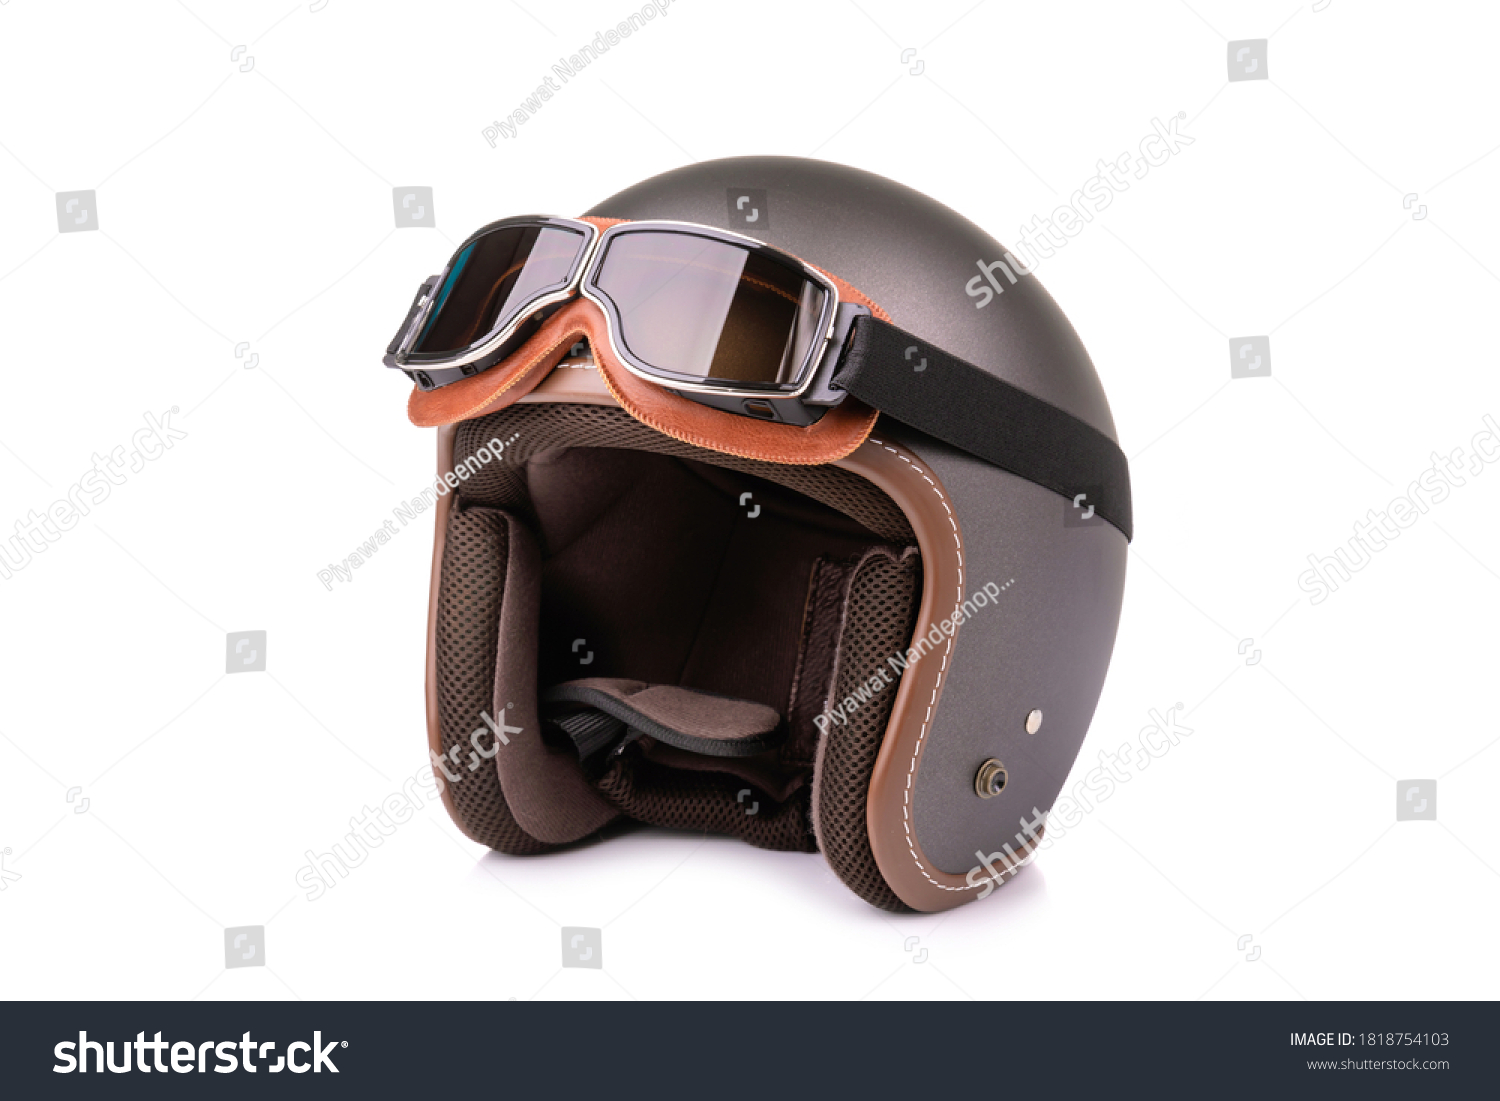 Close up new grey vintage helmet and wind goggle. Studio shot isolated on white background #1818754103